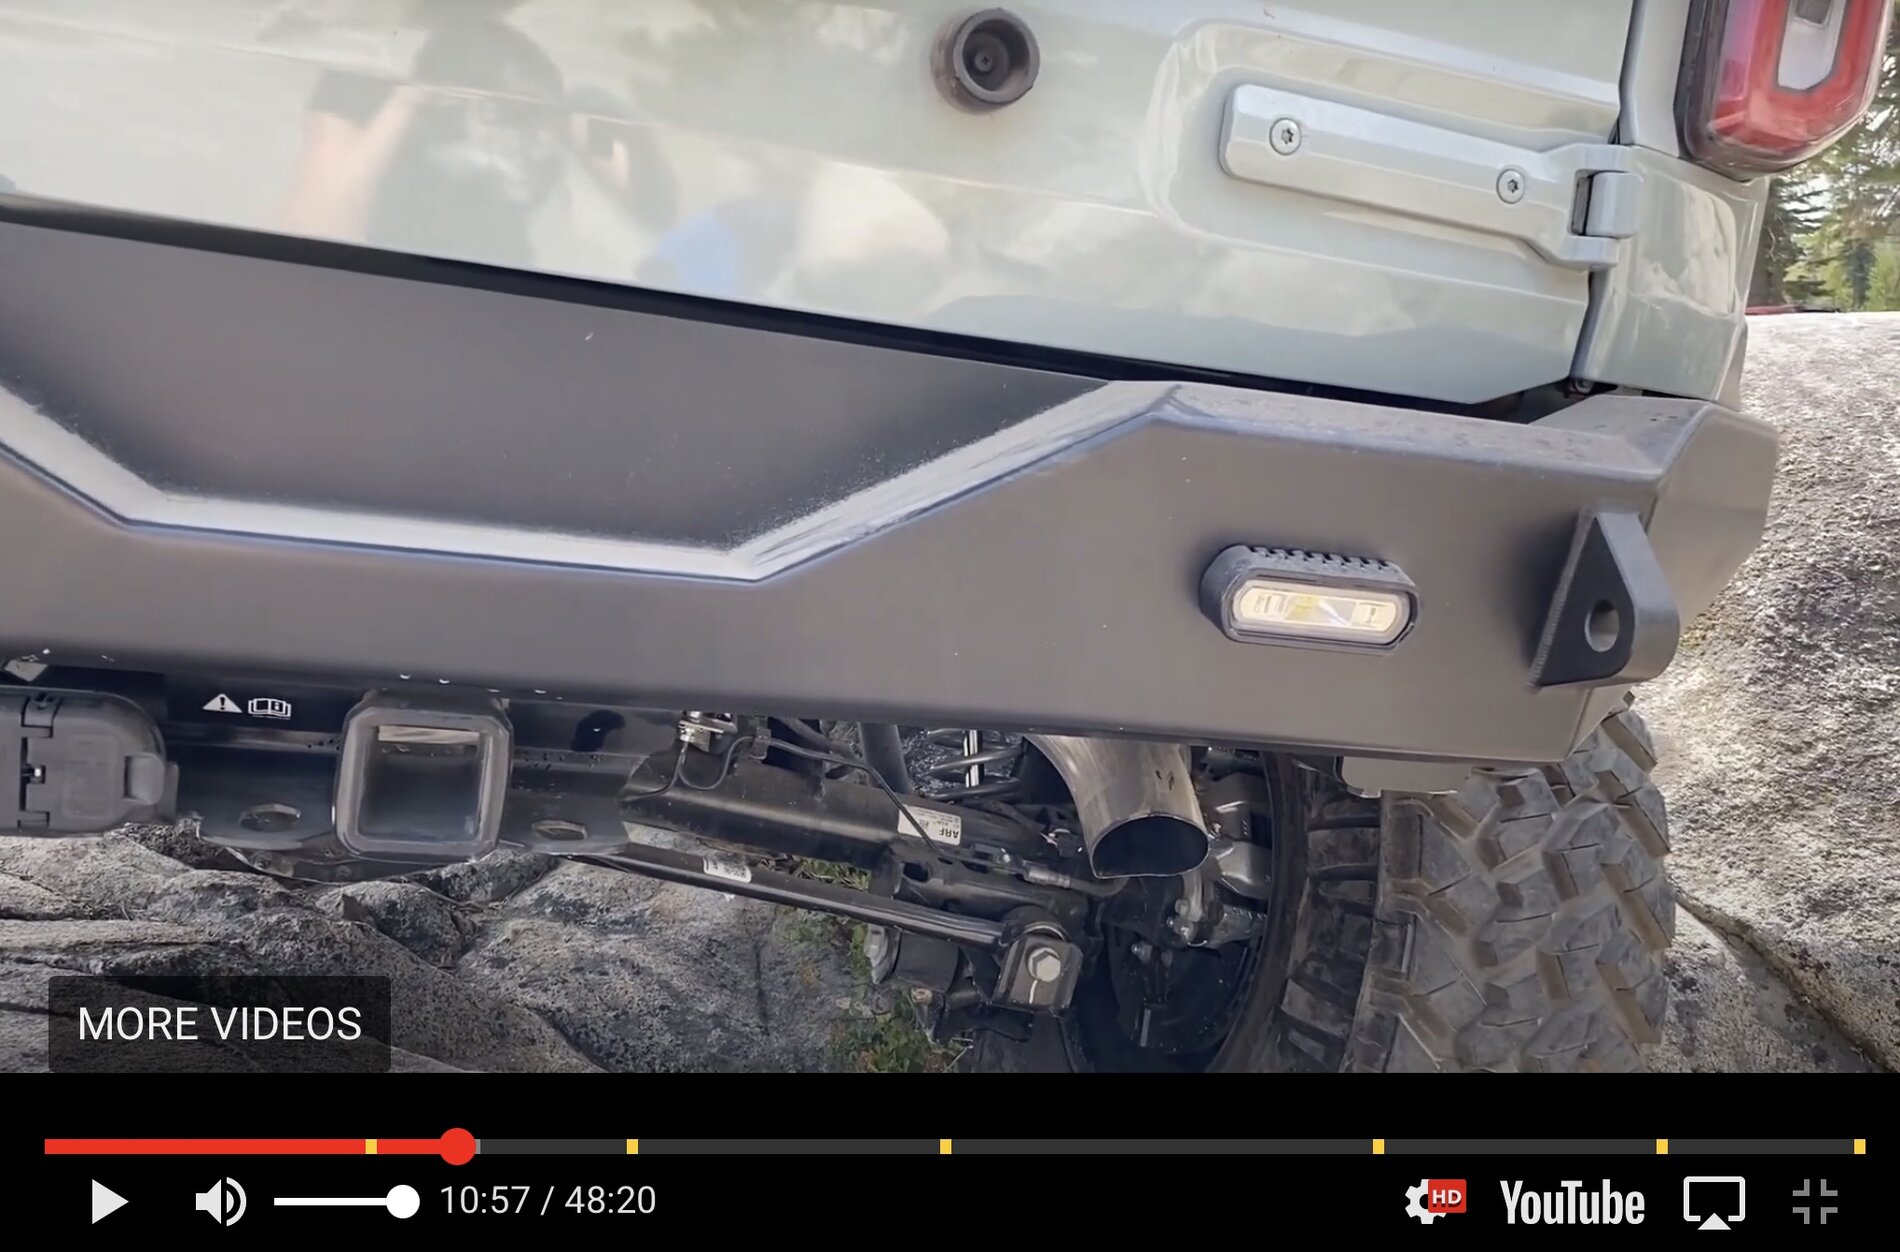 Ford Bronco Fun-Haver 2021 Bronco parts coming! Added: walkaround and Rubicon trail footage by Loren Healy 7B2013D1-ACCC-45BD-B151-E89F0D9BAE13